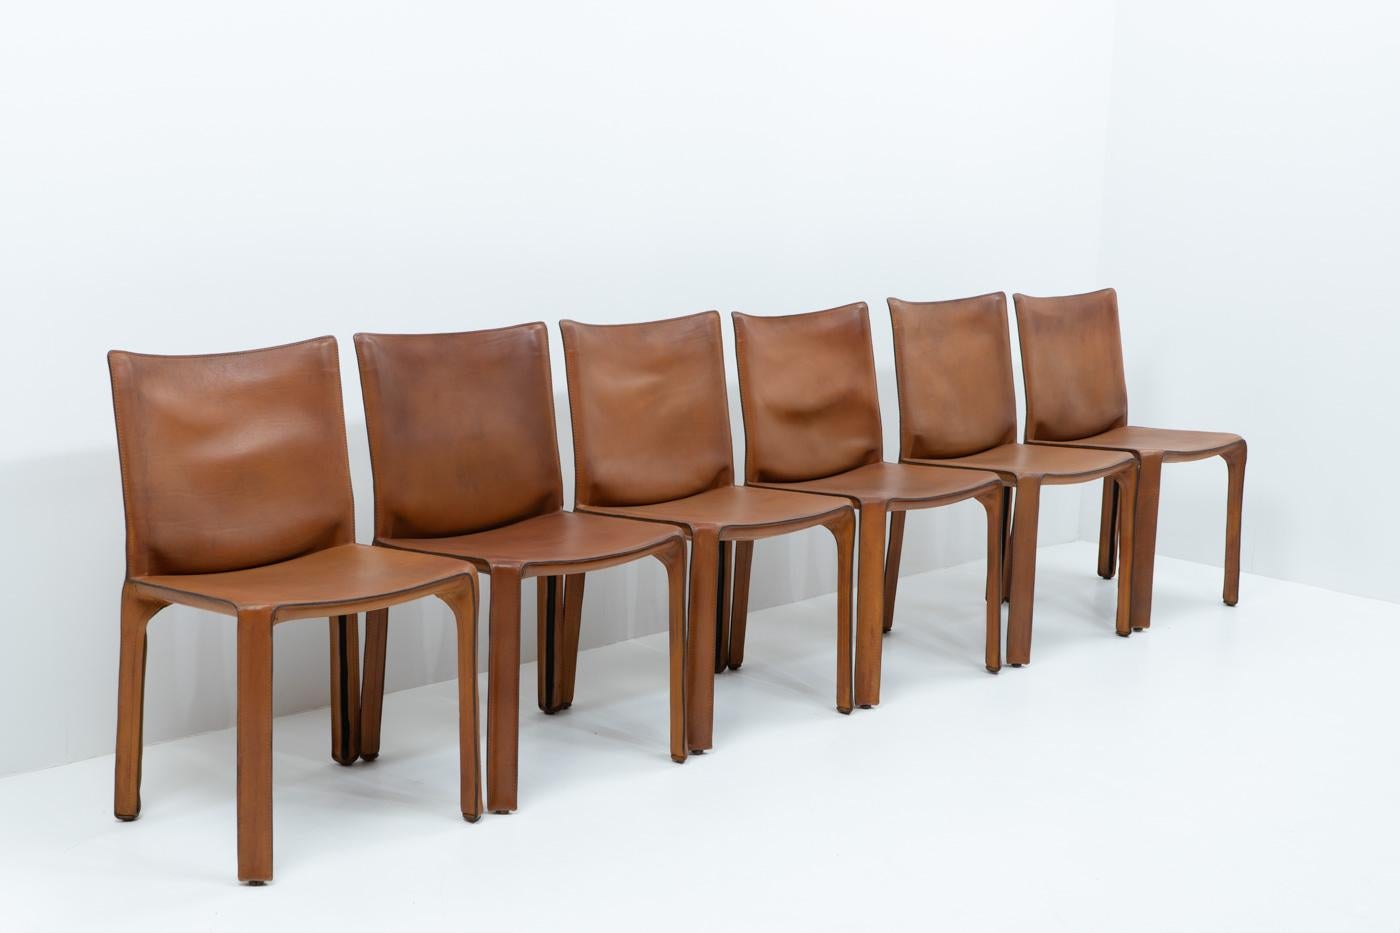 Late 20th Century Italian Design Classic Cab 412 Chairs by Mario Bellini for Cassina, Set of Six For Sale